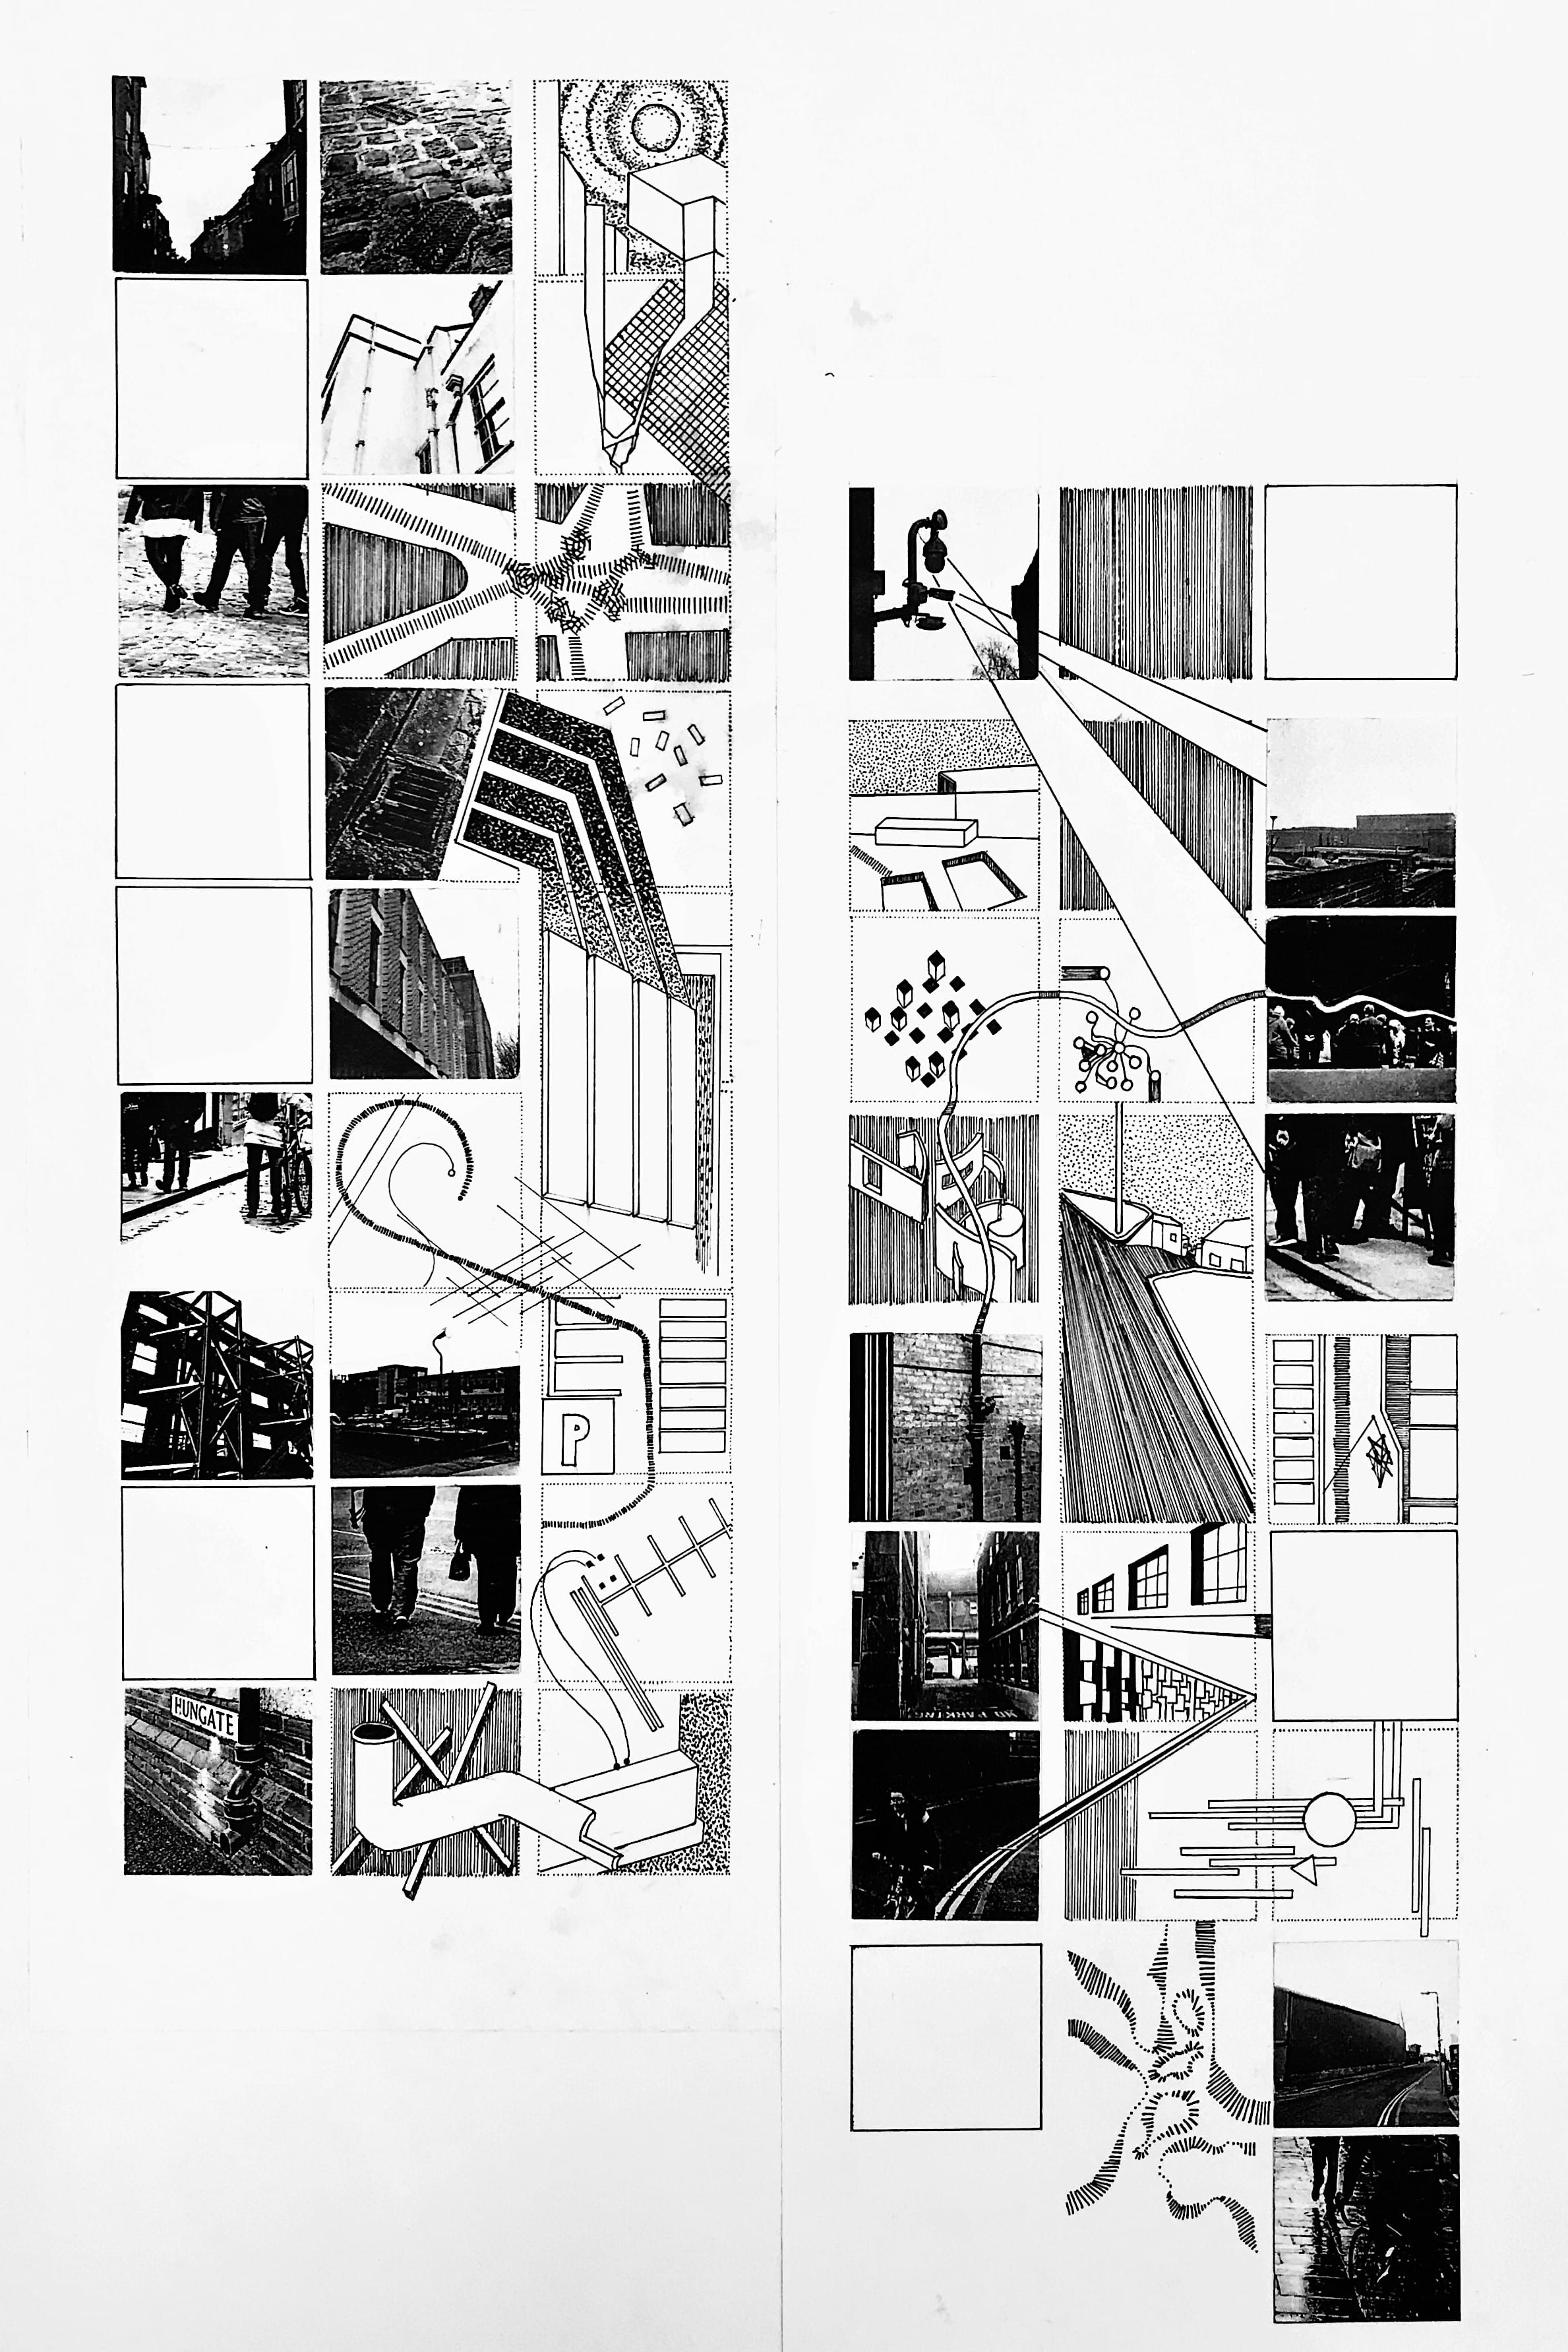 A collection of black and white illustrations, maps photographs from around a city.